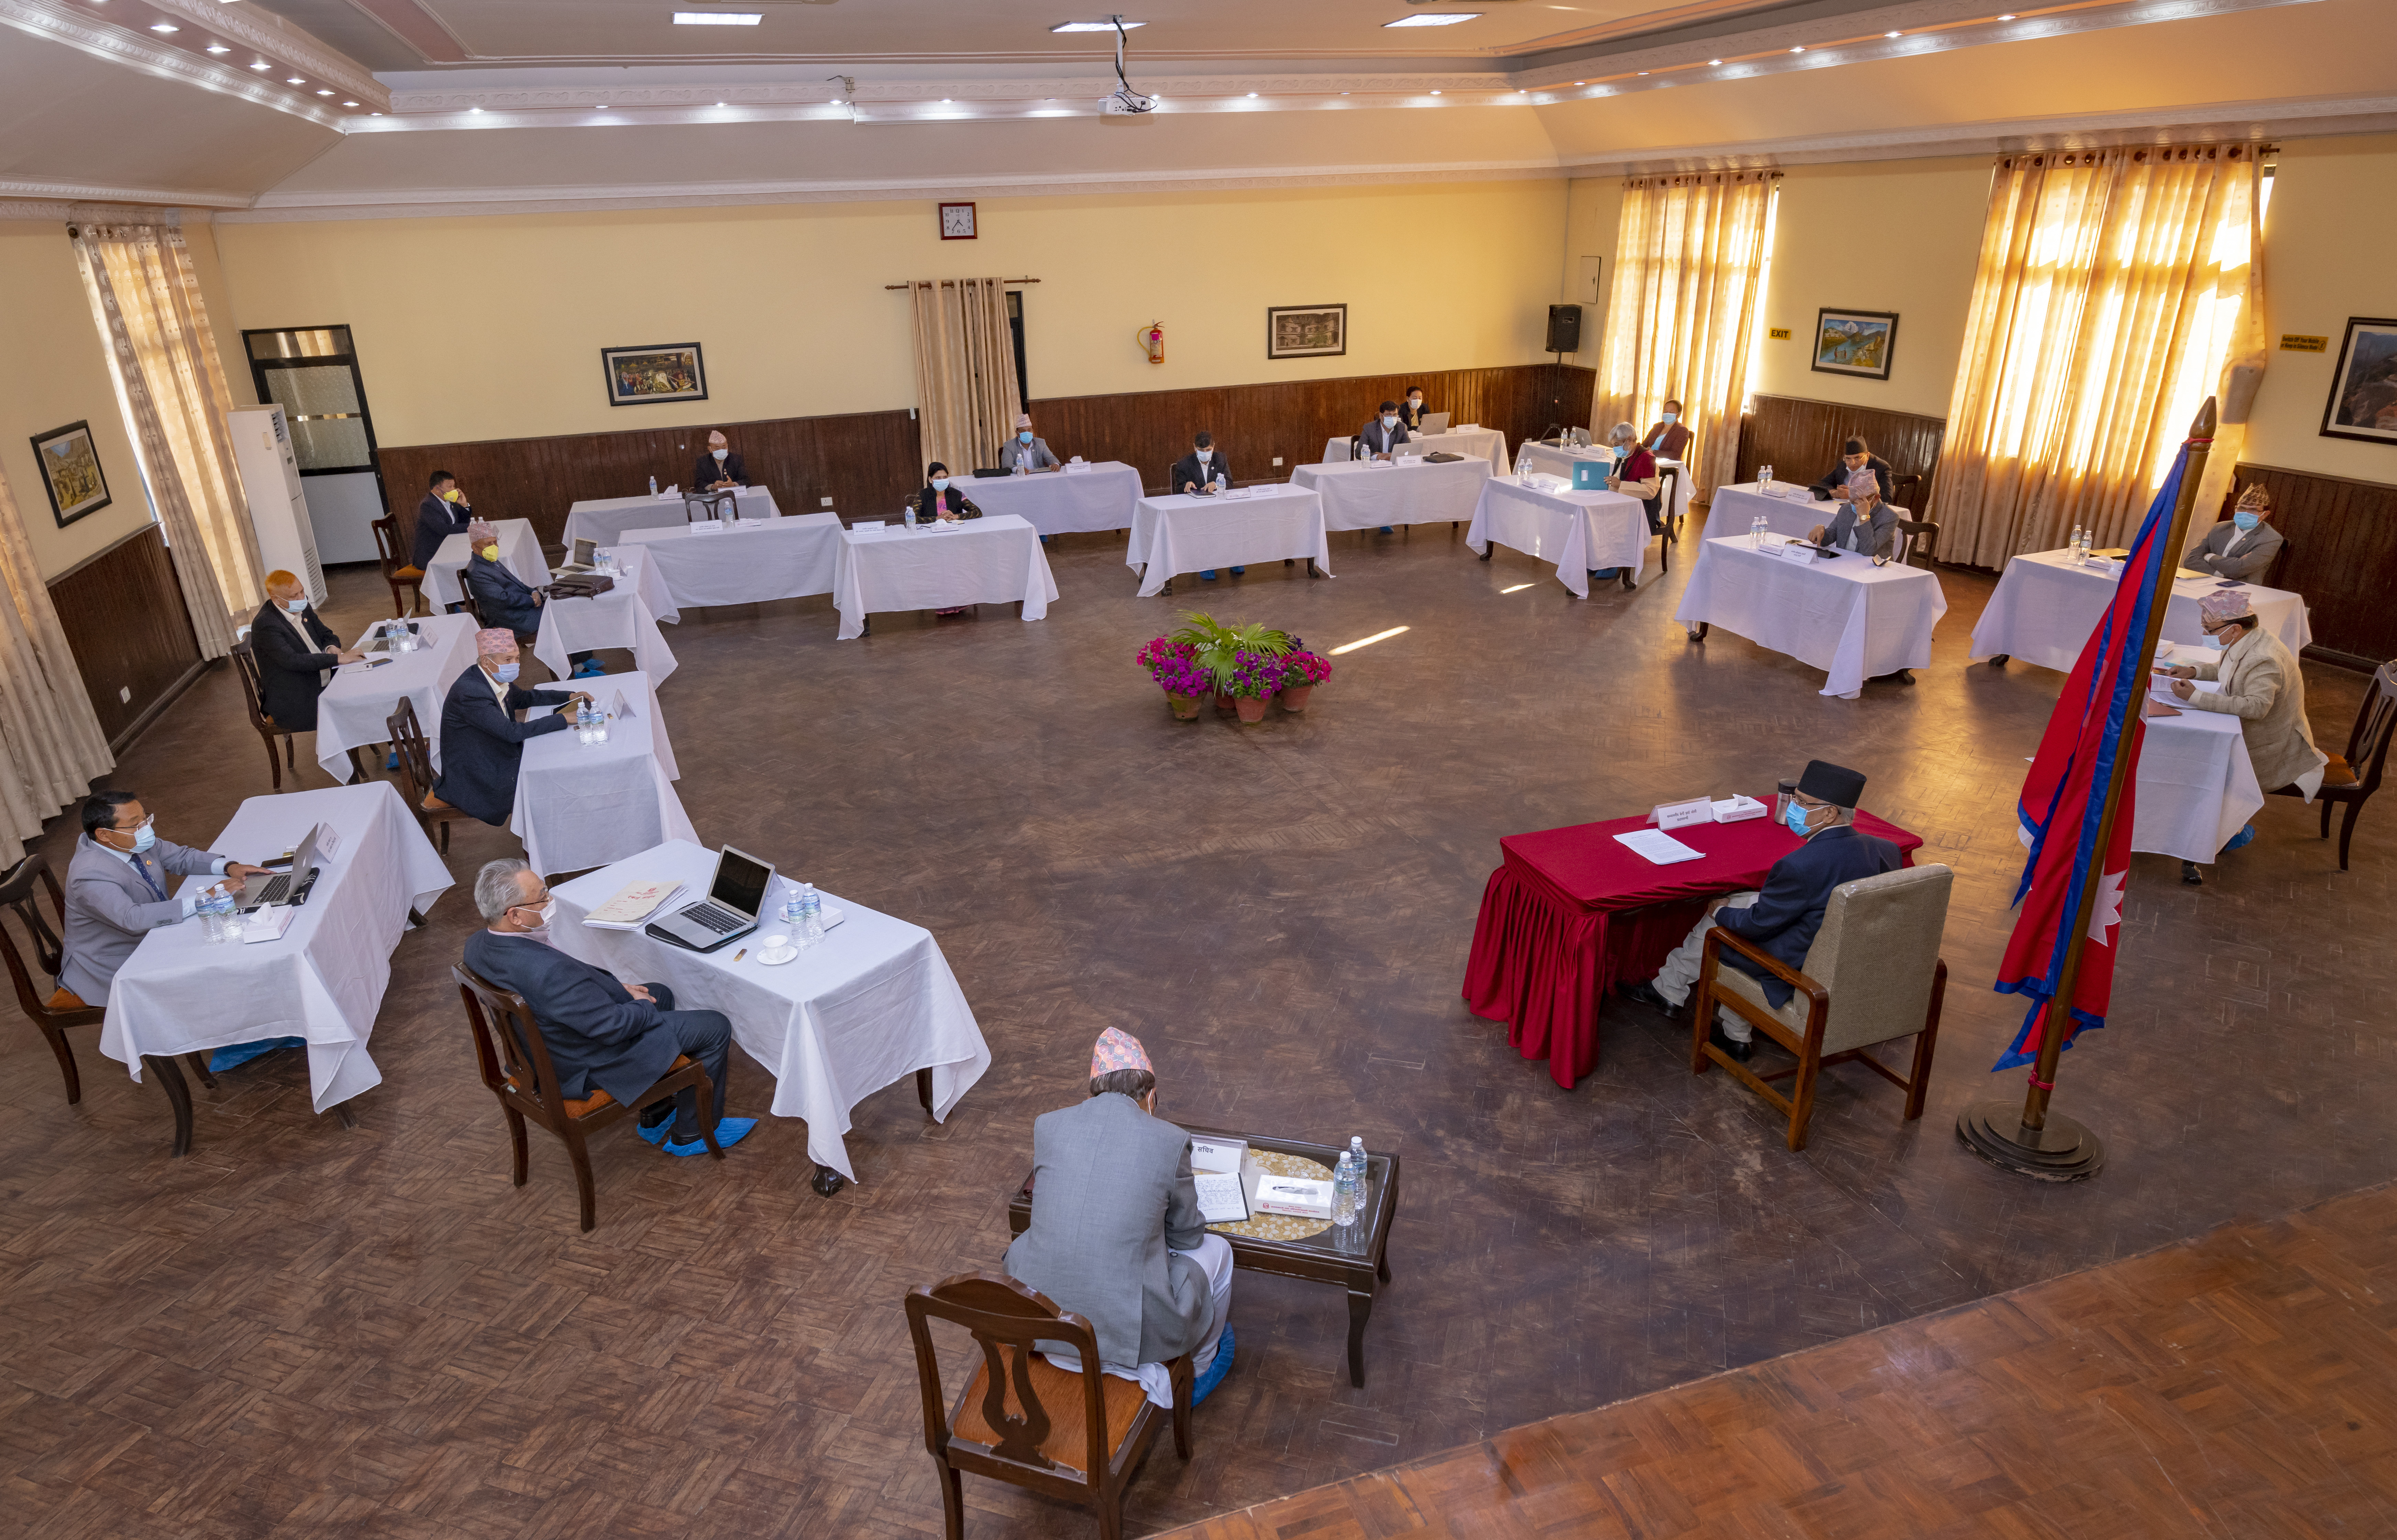 Ministers of the Cabinet are seen seated at a safe distance from one another in this picture from the cabinet meeting held at the Prime Minister's official residence, in Baluwatar, Kathmandu, on Saturday, April 4, 2020. Photo: Rajan Kafle/Secretariat of Prime Minister of Nepal